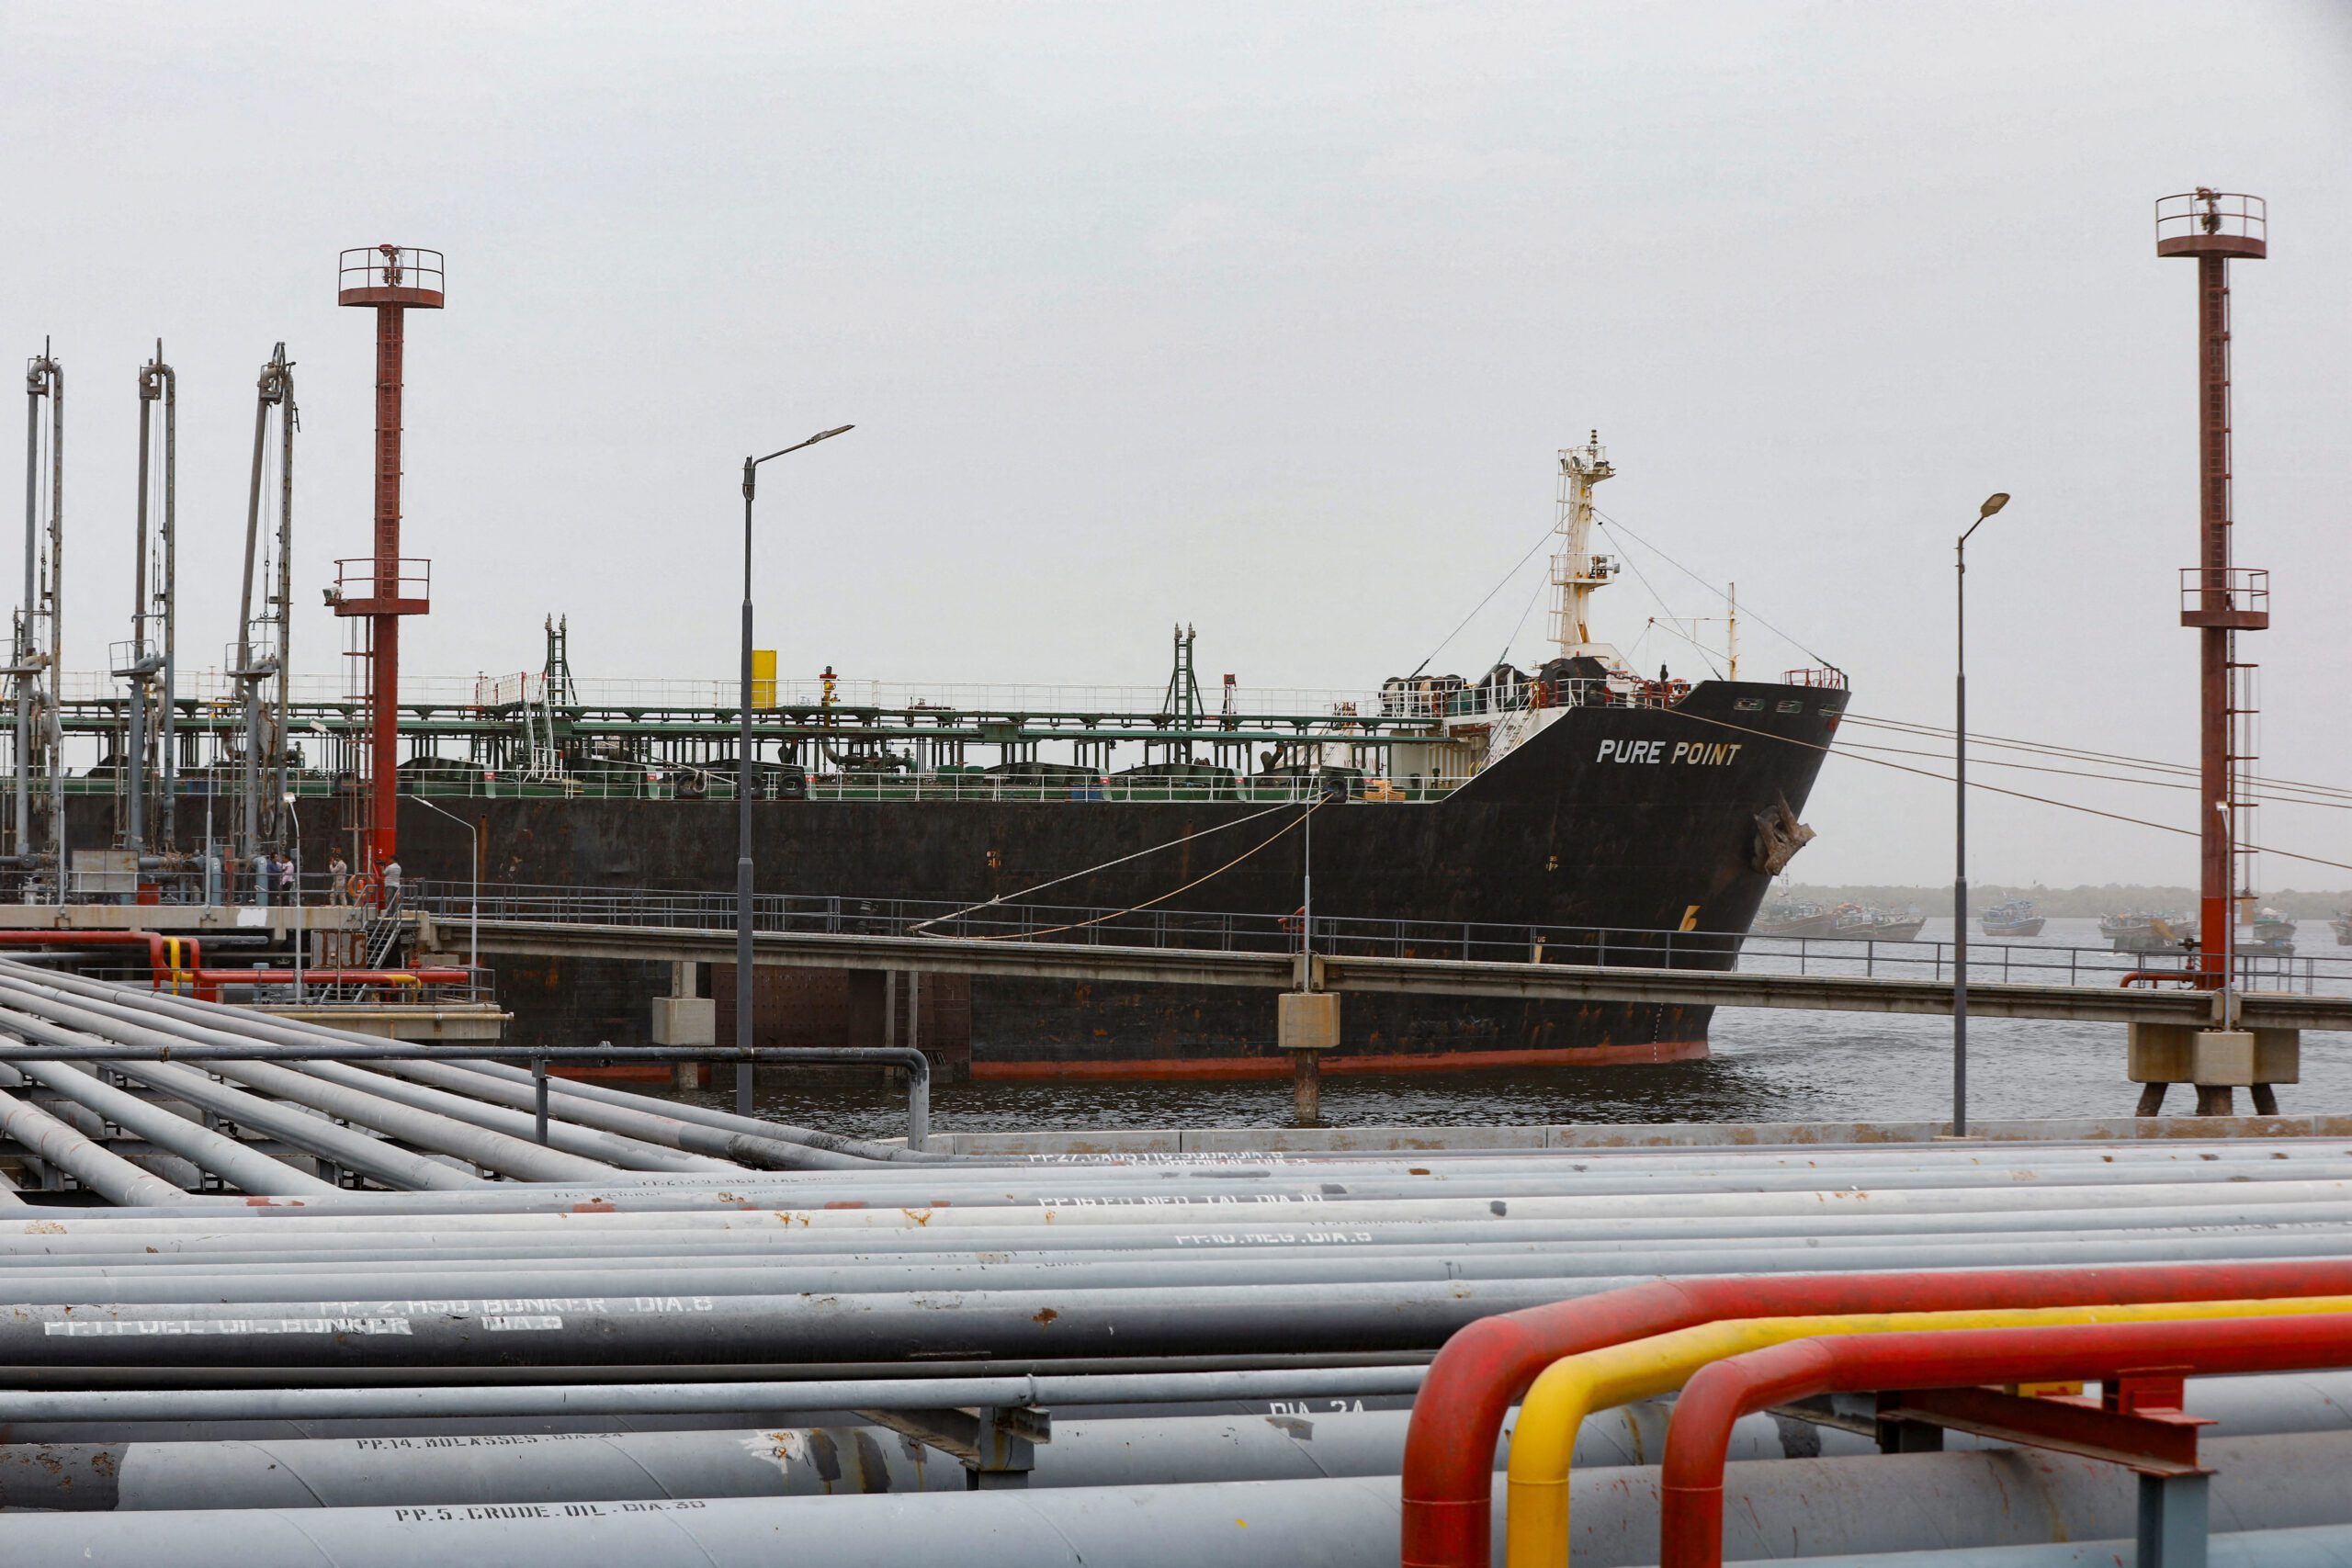 Crew members check the deck of the Russian oil cargo Pure Point, carrying crude oil, anchored at a port in Karachi, Pakistan June 13, 2023. REUTERS/Akhtar Soomro/File Photo